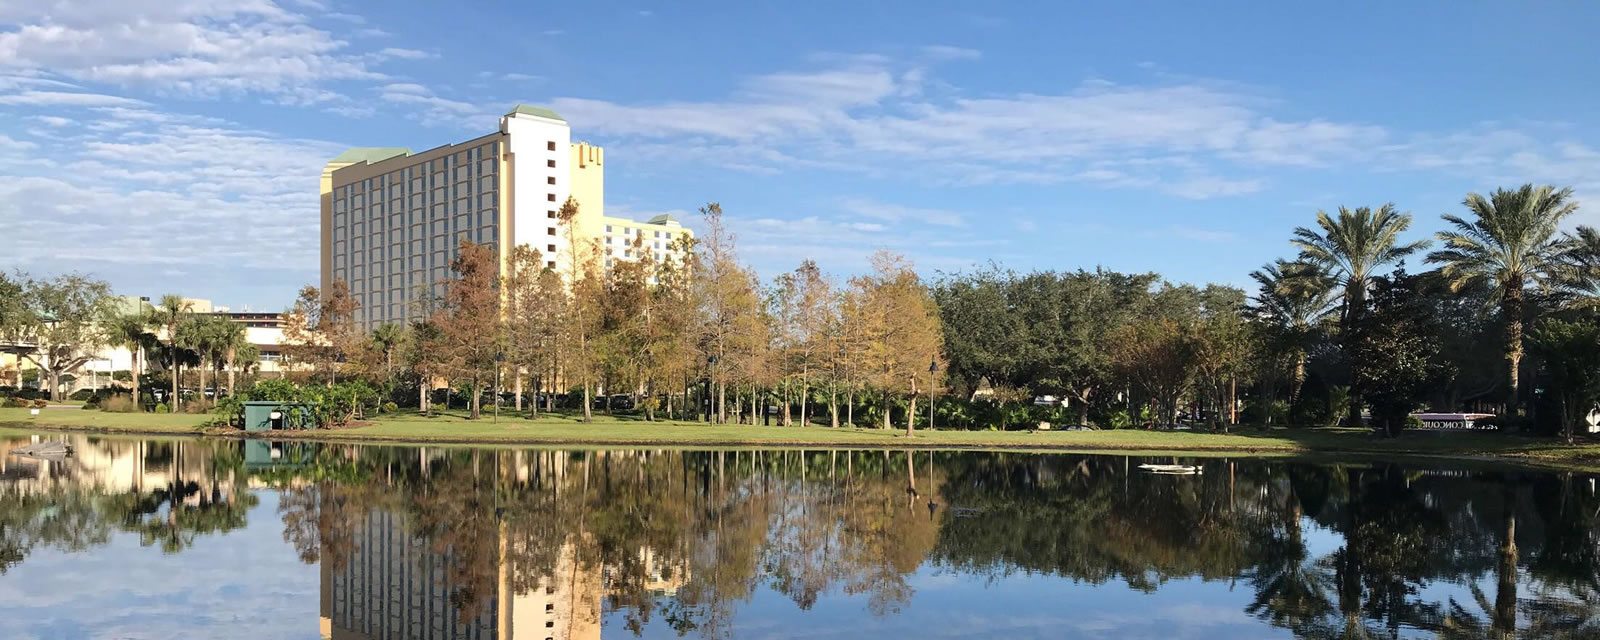 Shot of Rosen Plaza from the other side of lake with reflection in water